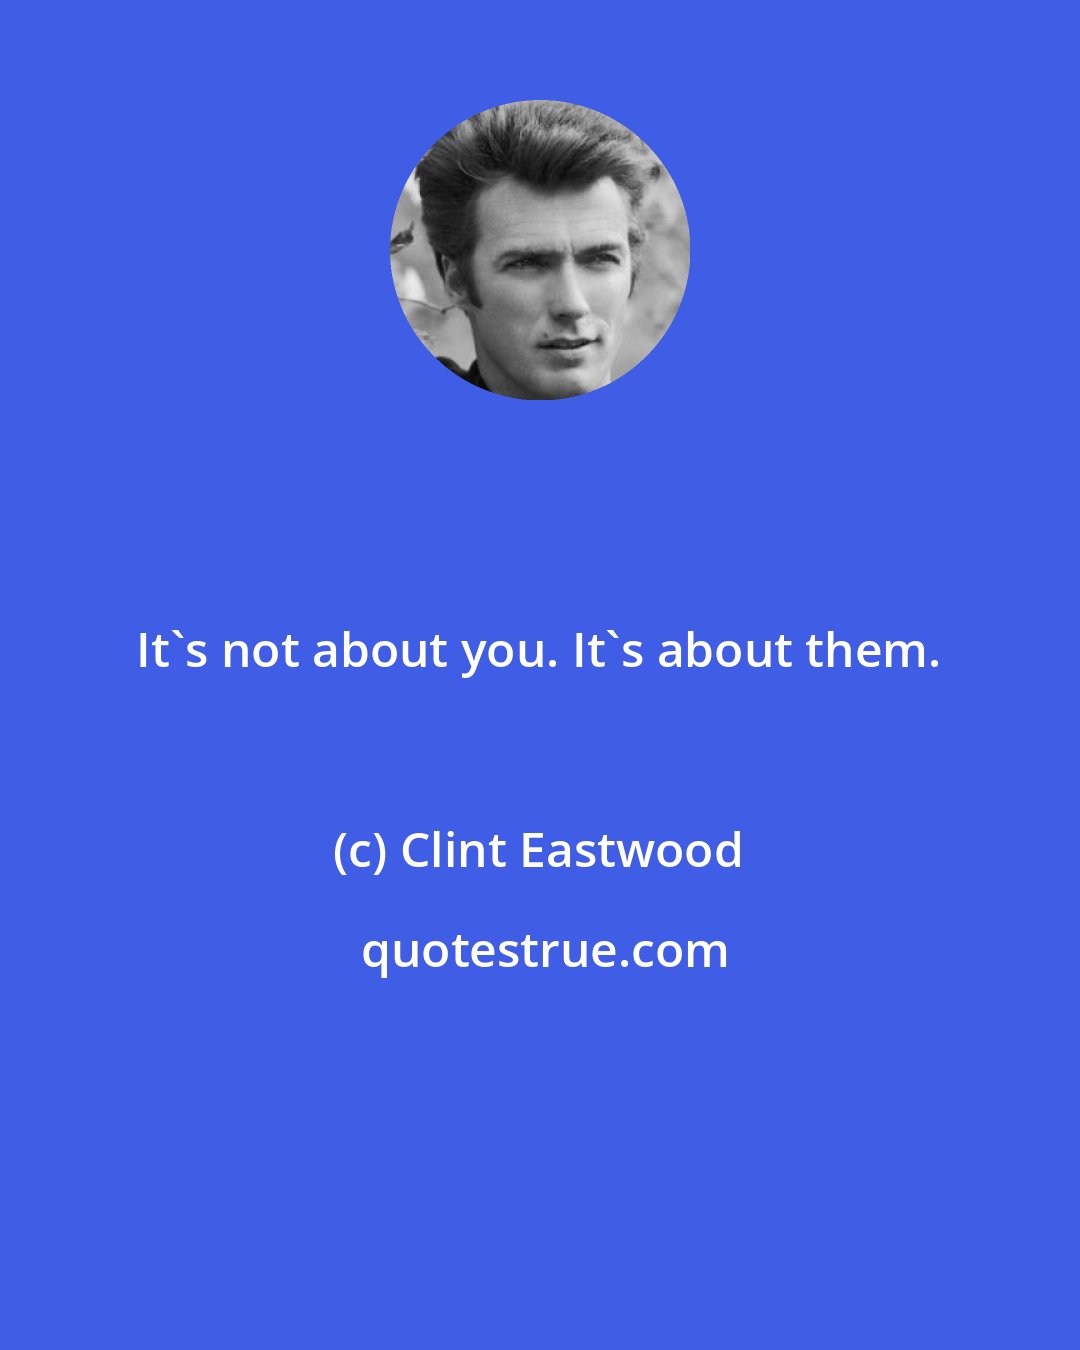 Clint Eastwood: It's not about you. It's about them.